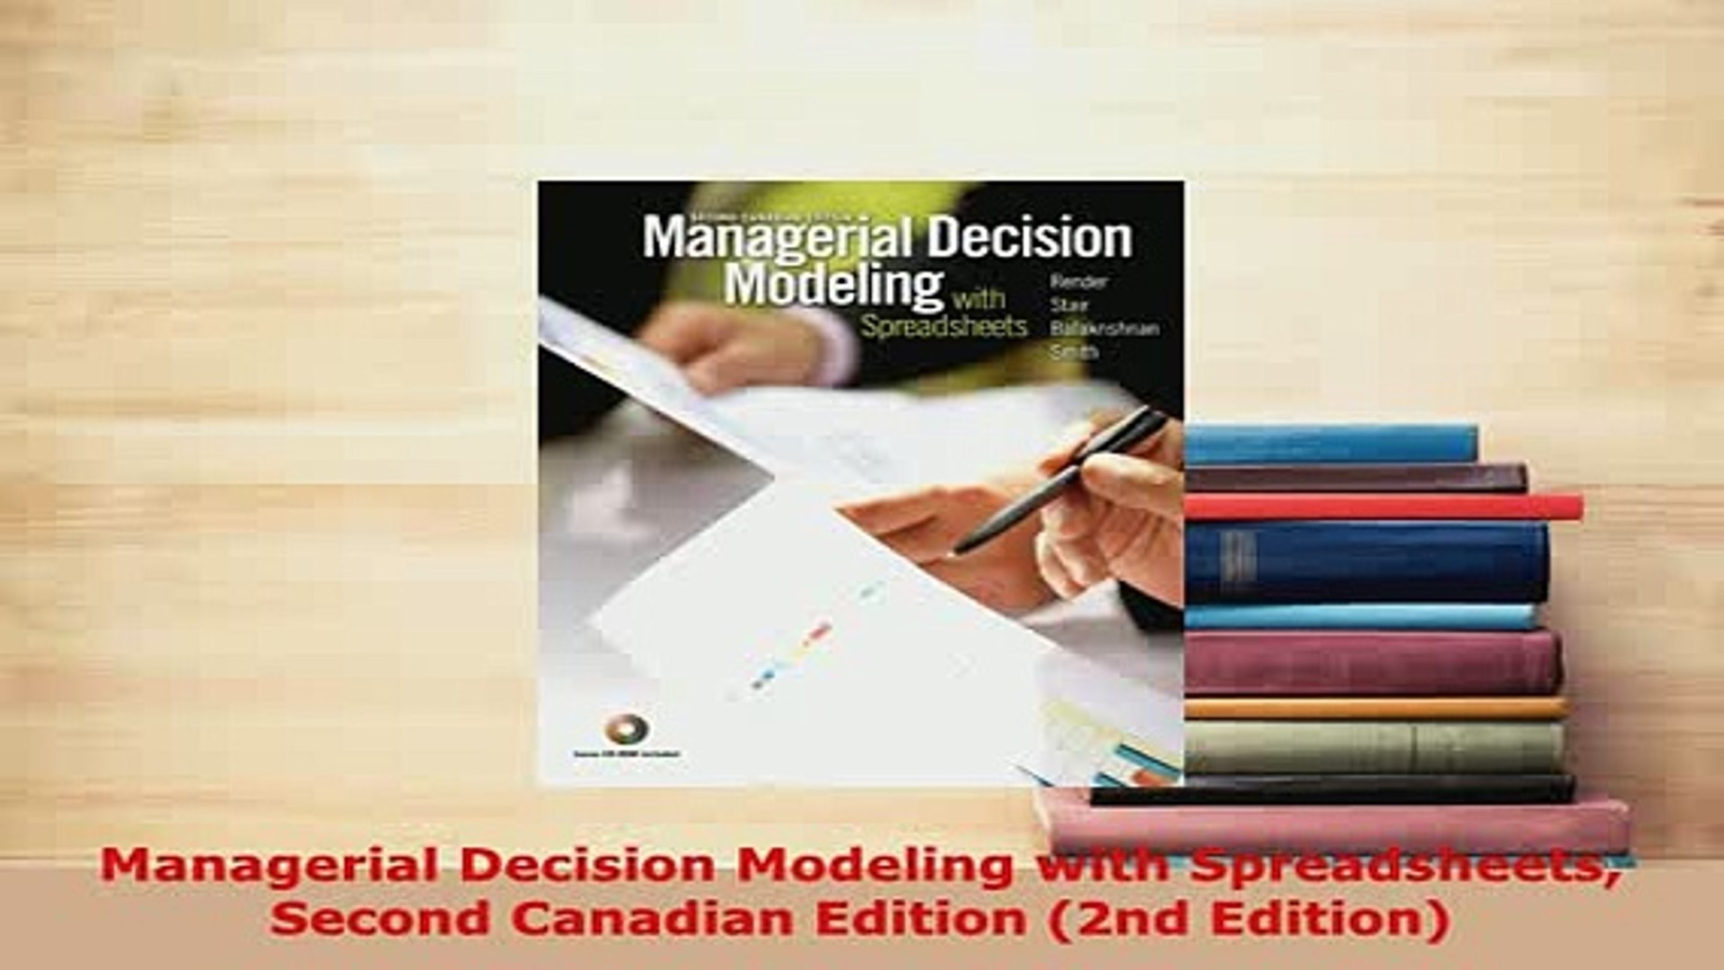 managerial decision modeling with spreadsheets pdf free download